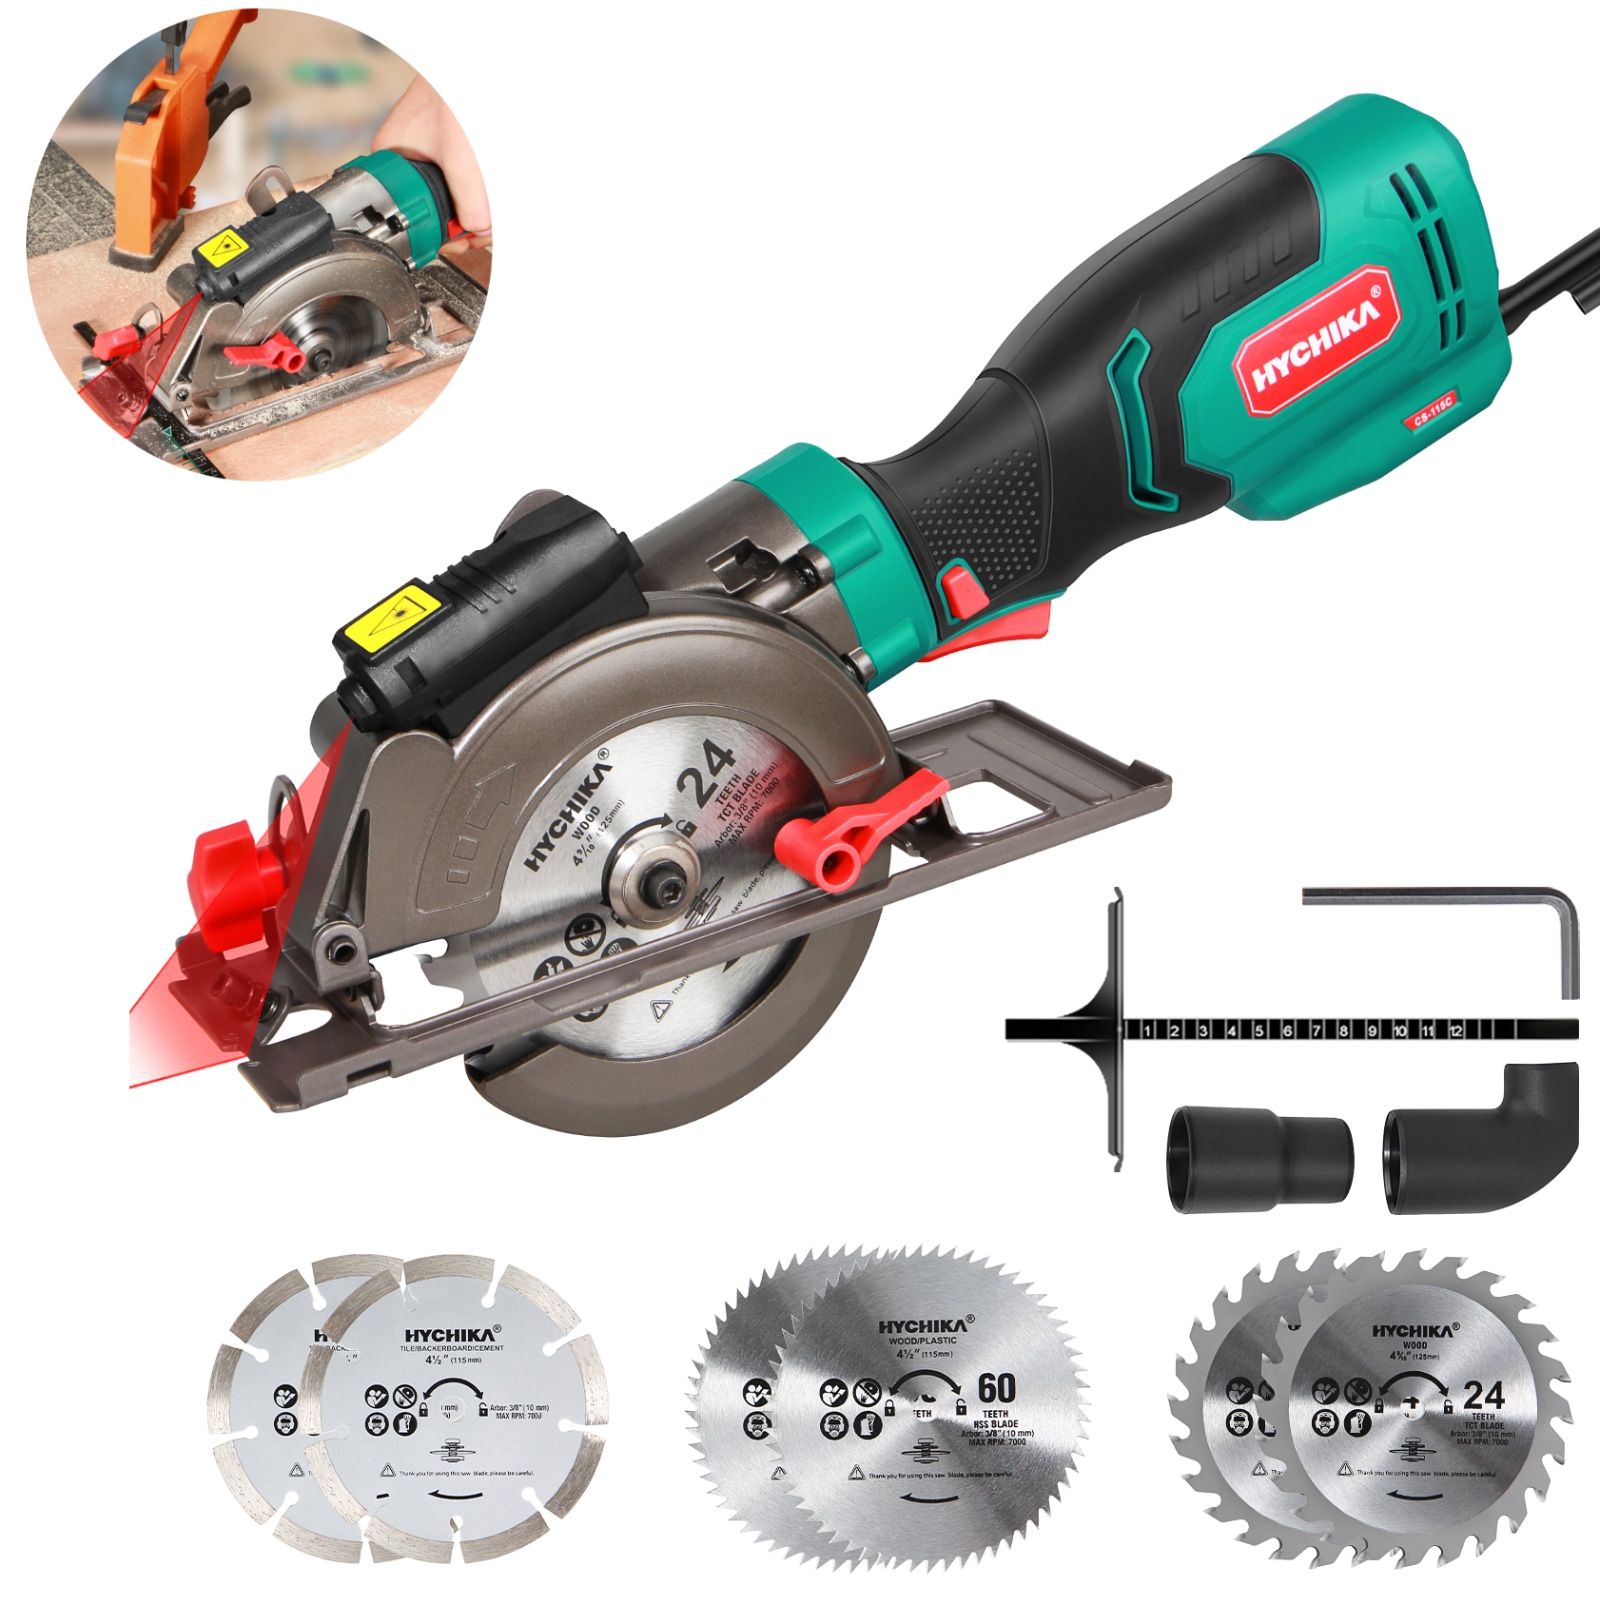 HYCHIKA Adjustable Angle Circular Saw with Laser Guide - 4-1/2-in